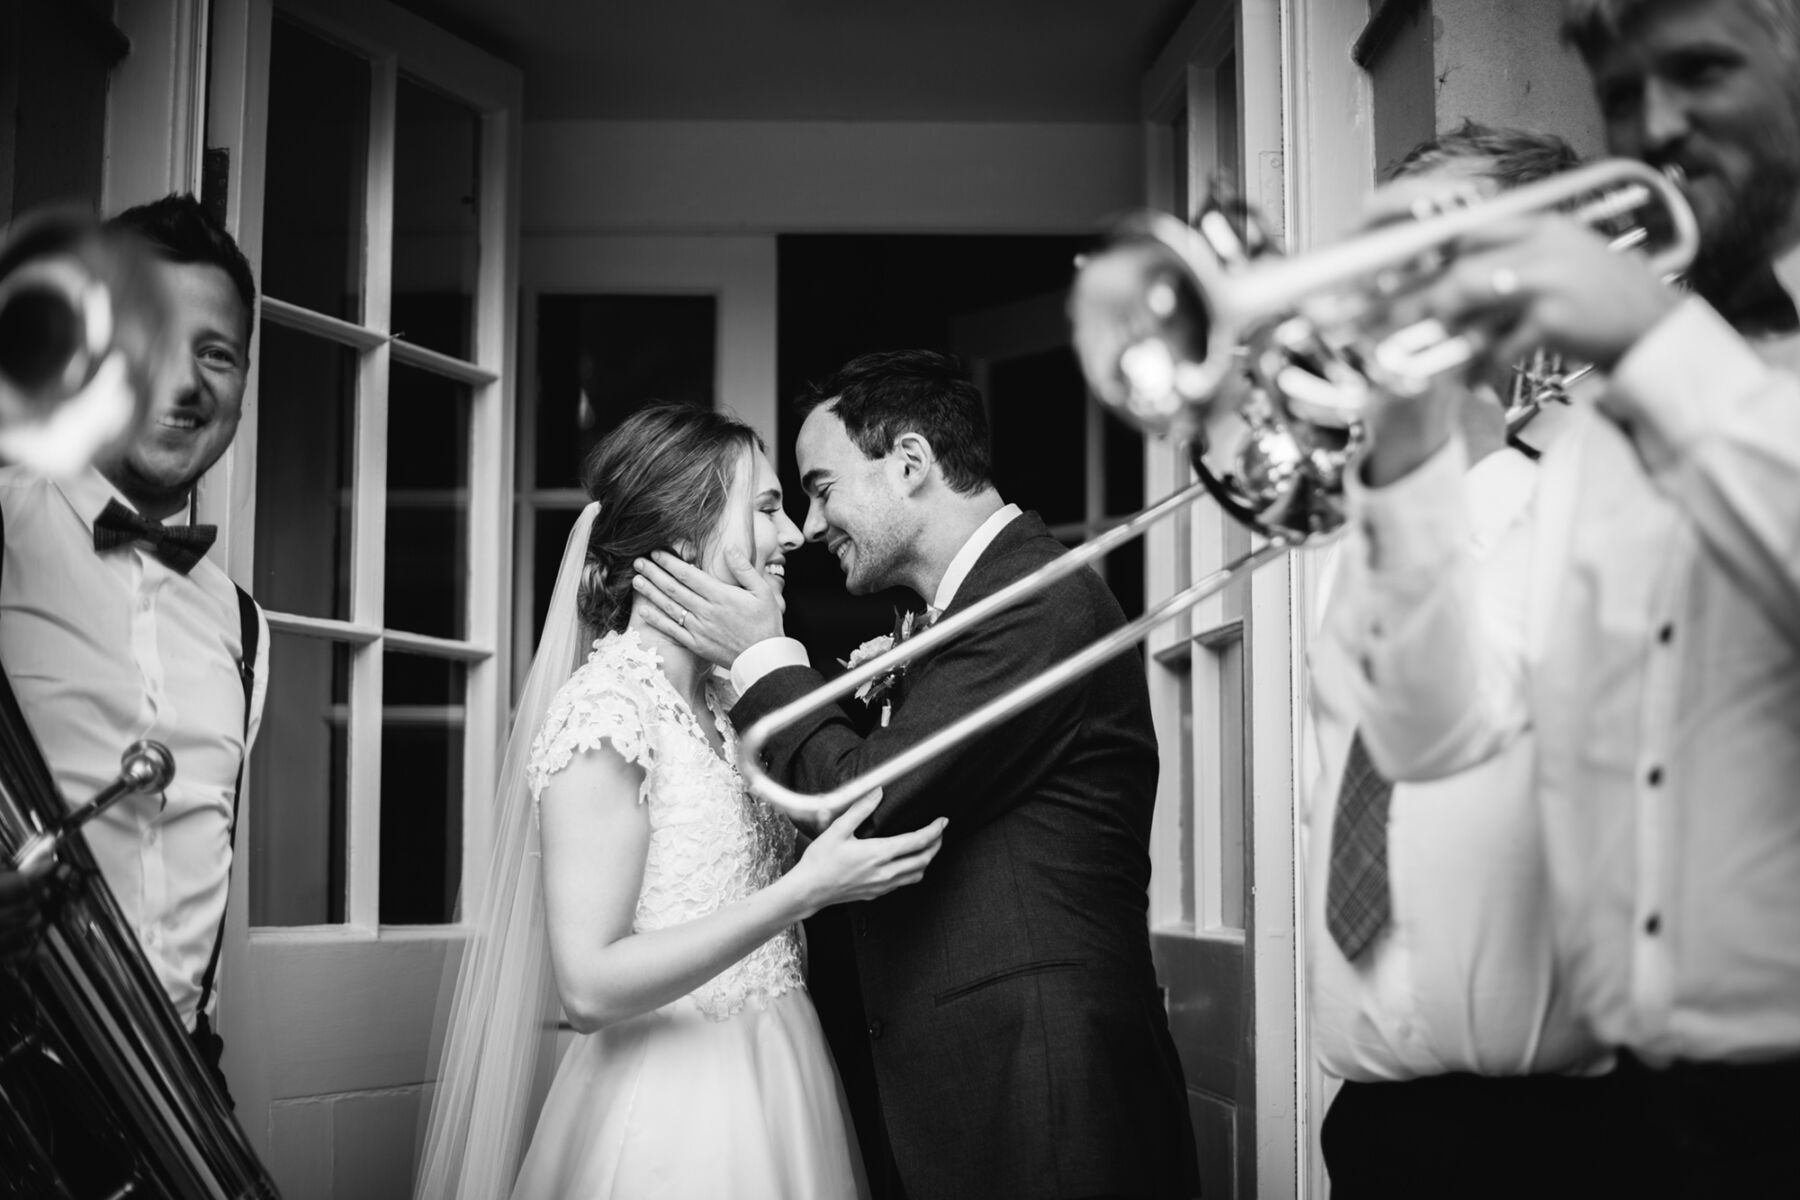 Groom lovingly holding bride's face as a brass band serenade them.